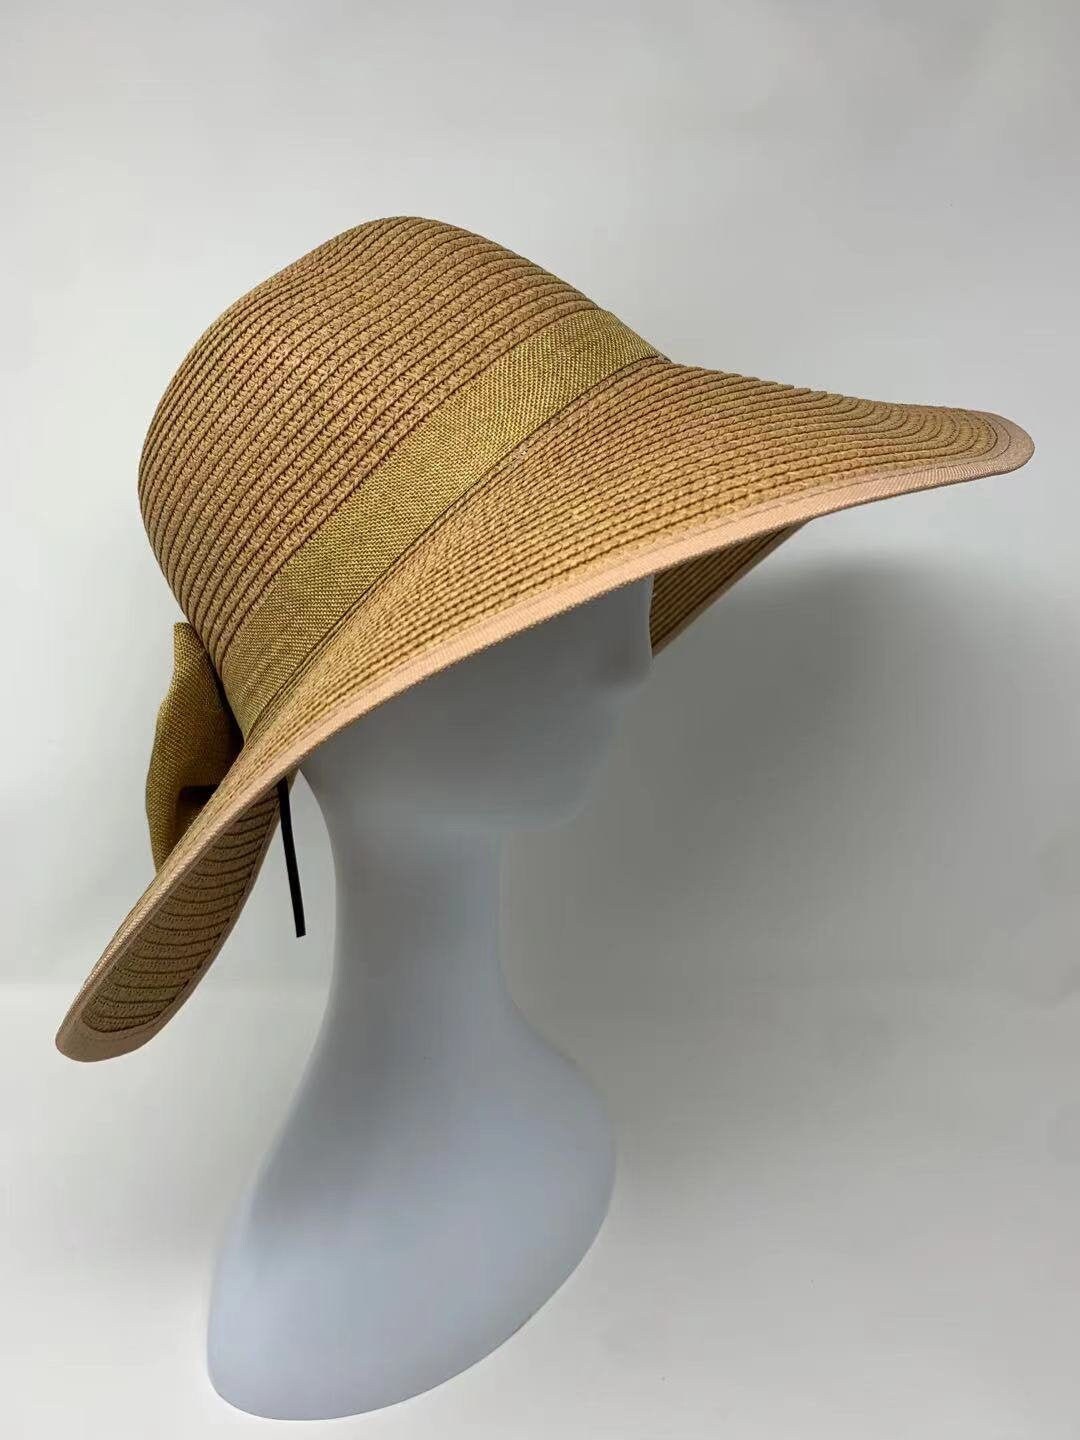 Vintage Summer Straw Hat With Wide Brim Beach Hat With Bow - Etsy